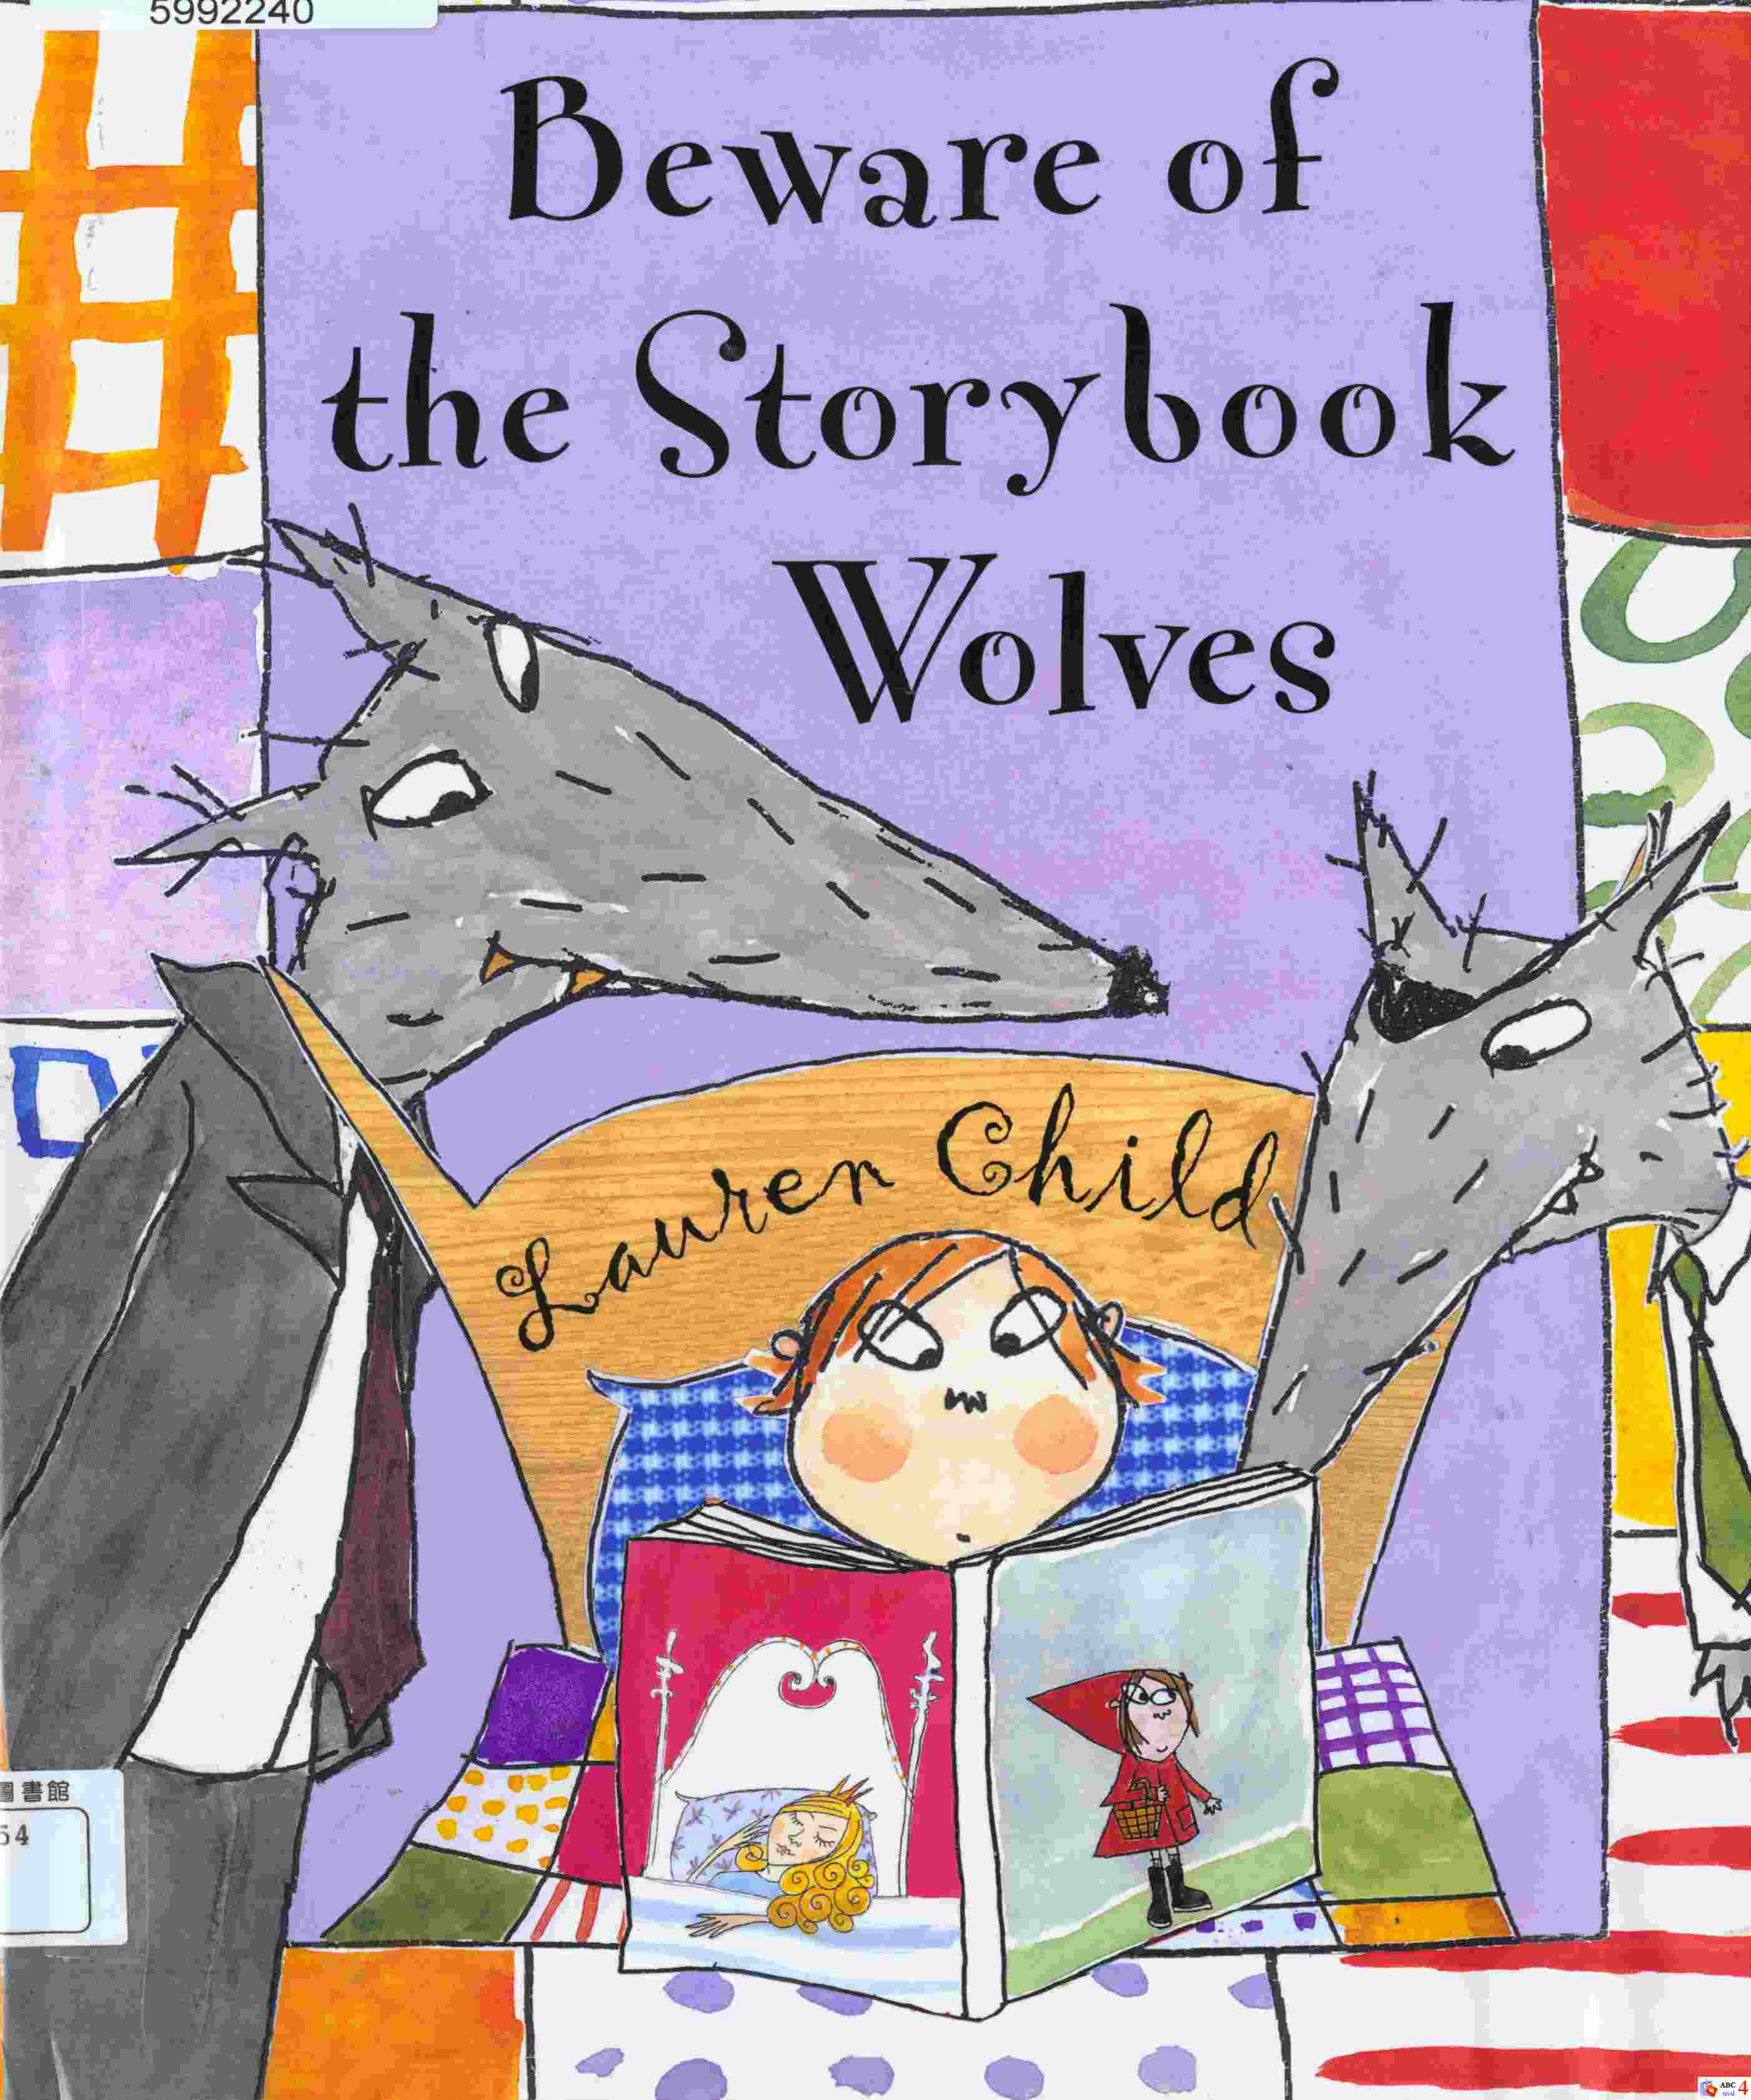 Beware of the storybook wolves 書封